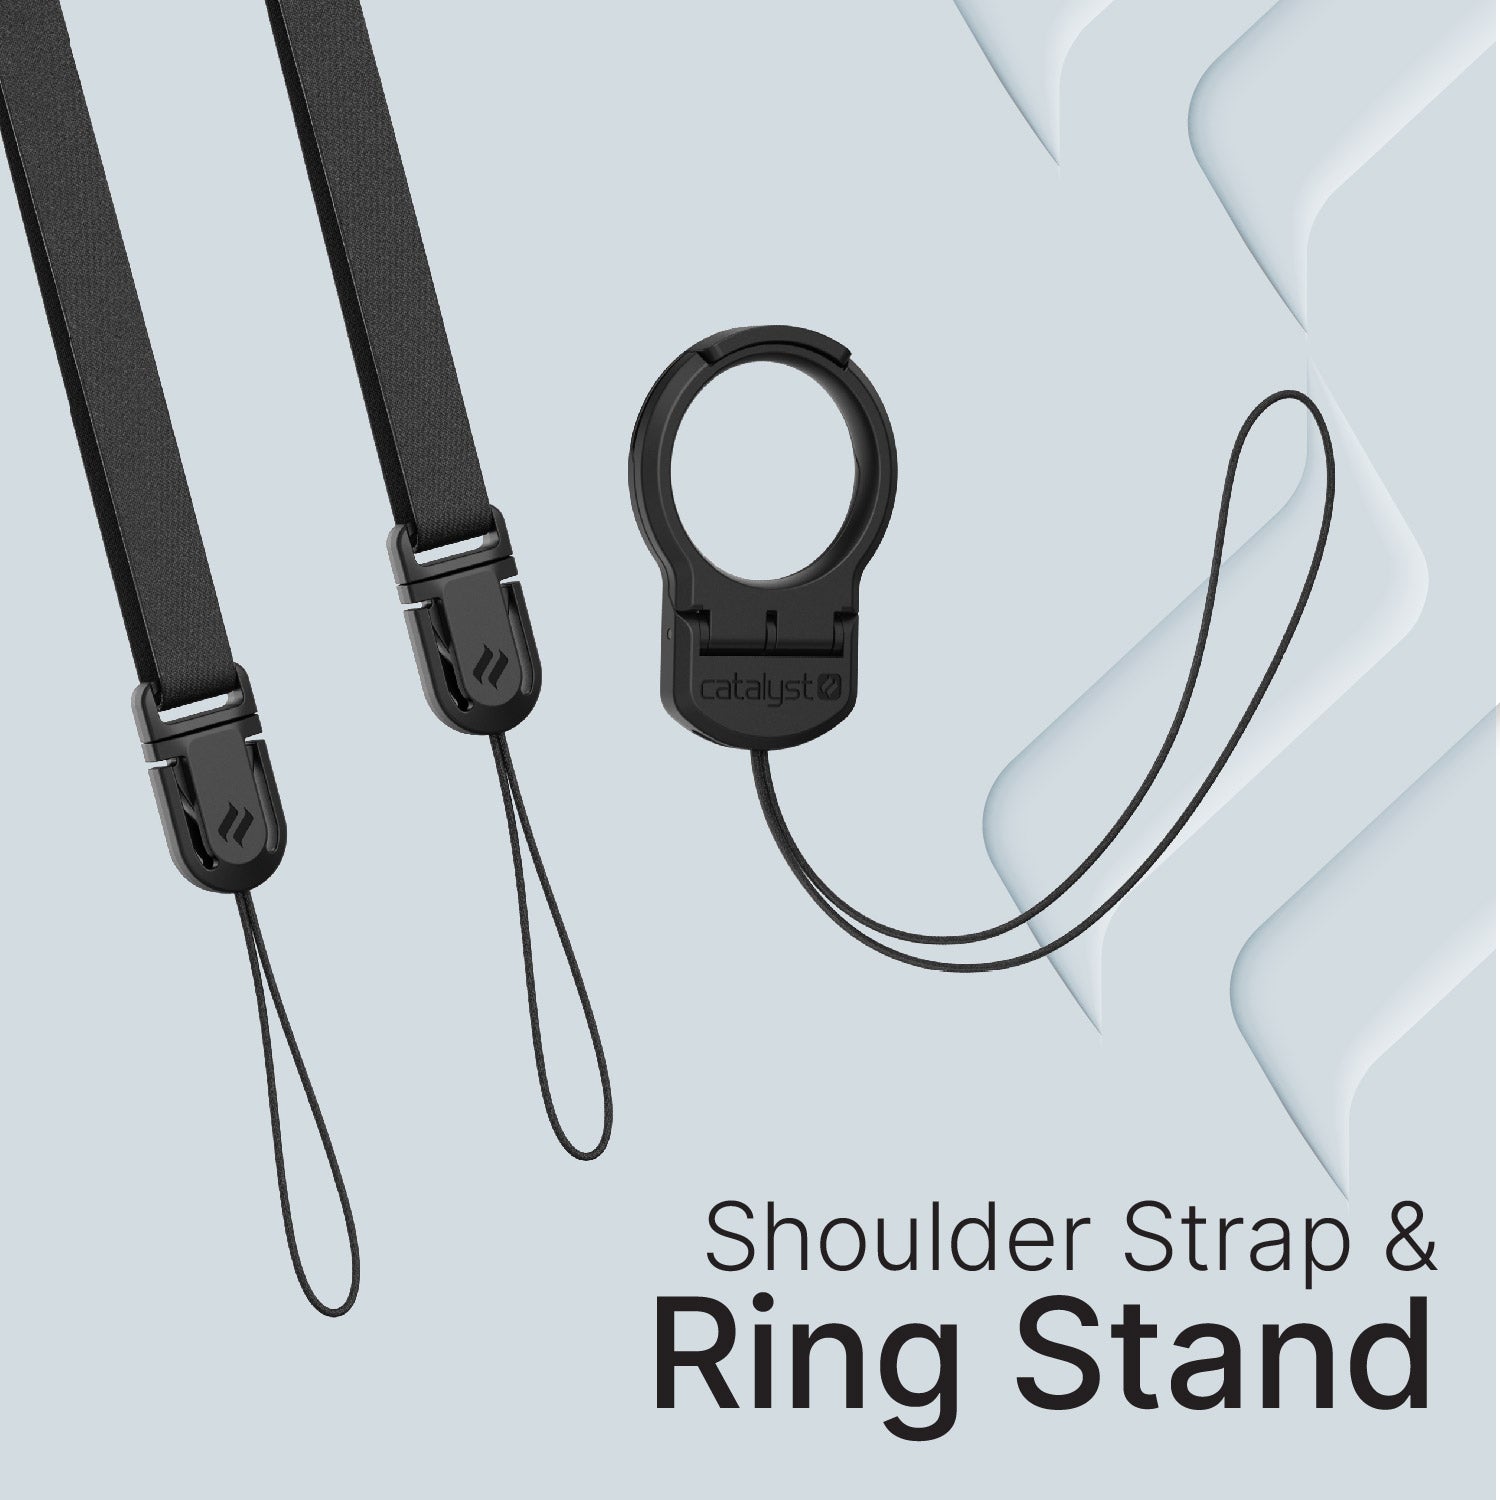 catalyst shoulder strap and ring stand bundle showing as a whole text reads shoulder strap and ring stand